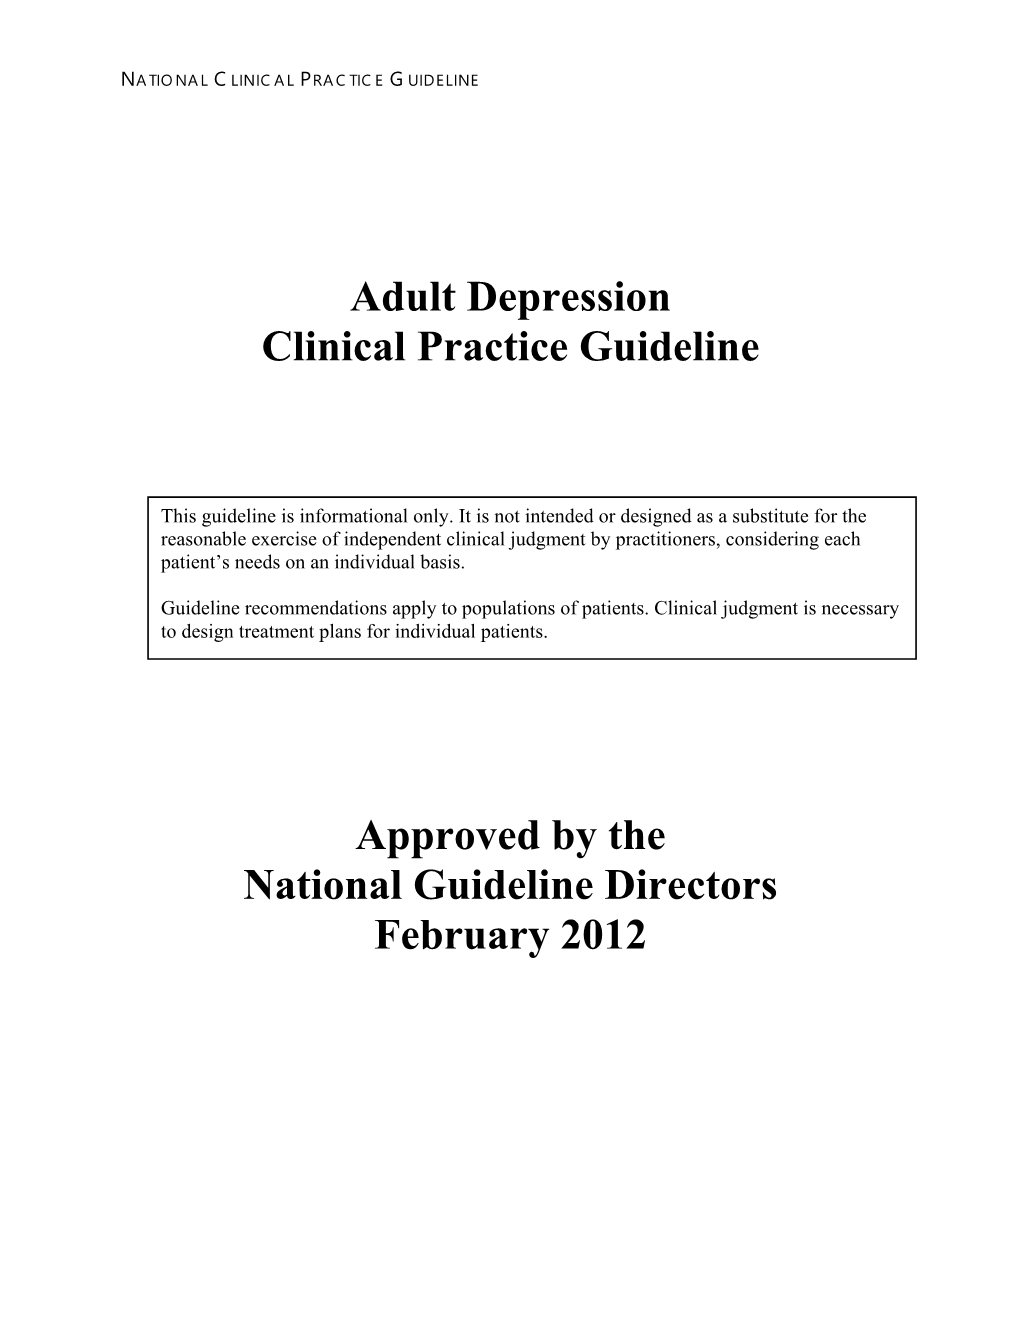 Adult Depression Clinical Practice Guidelines